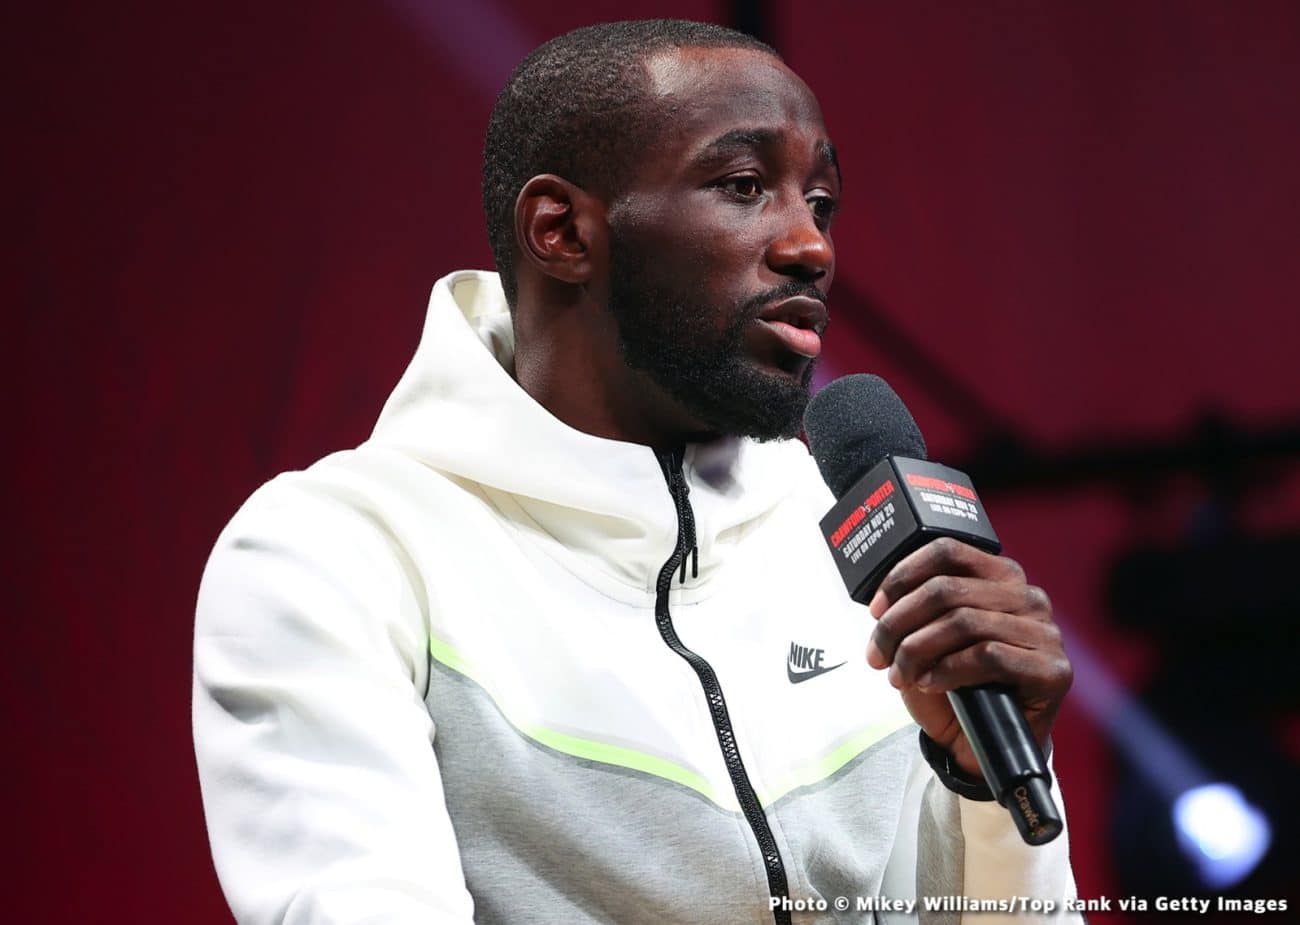 Image: Terence Crawford staying ready, training for Errol Spence Jr fight